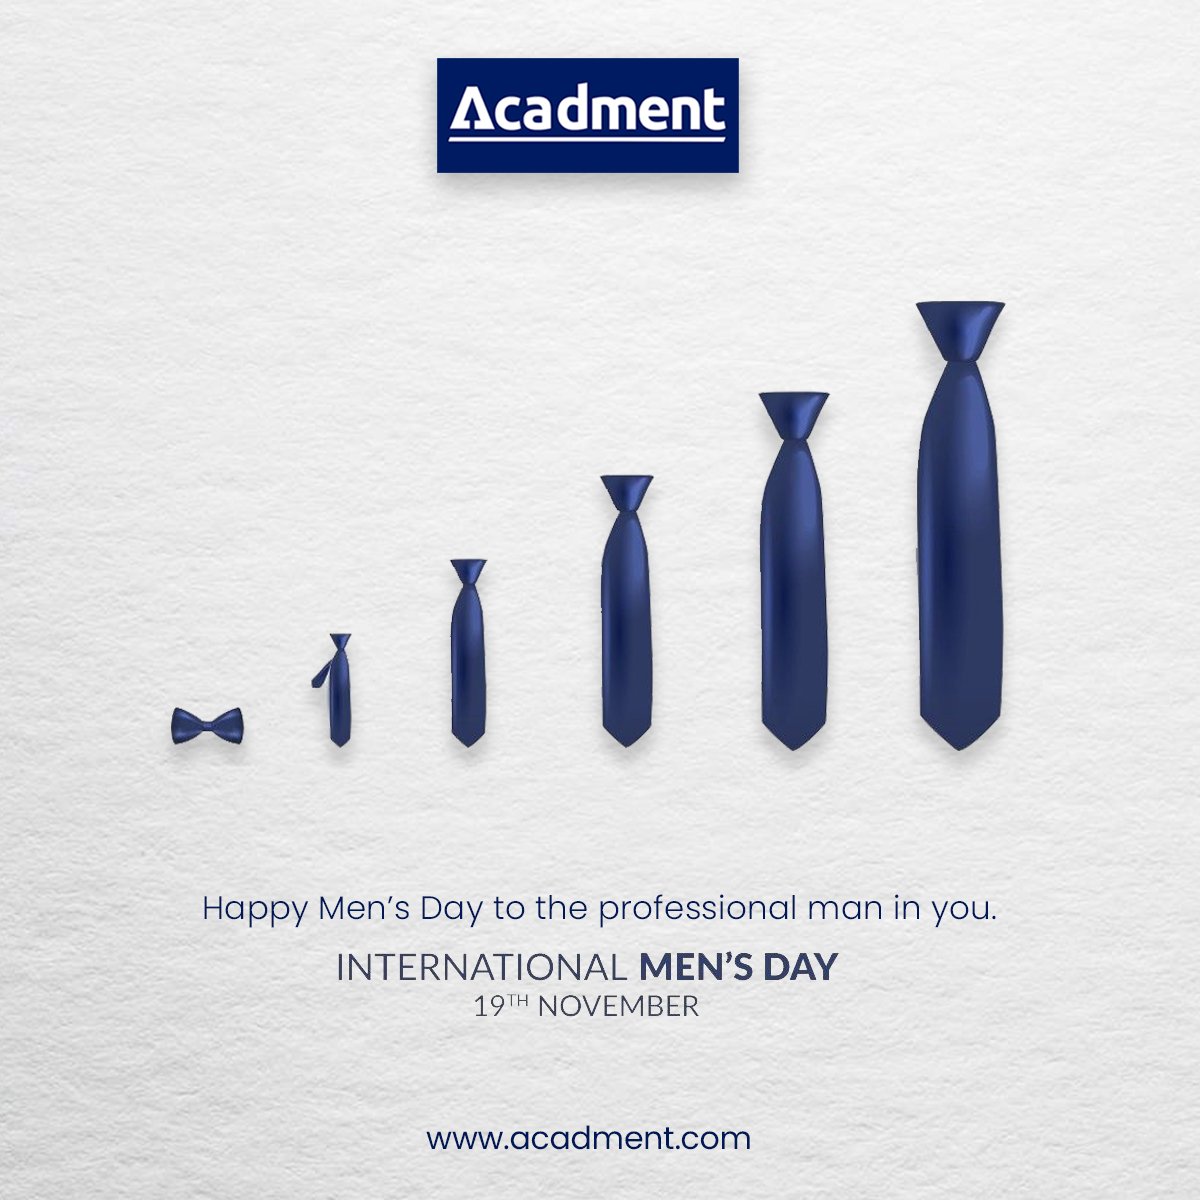 Boost the Professional Man in you with top Professional courses from Acadment....
#HappyInternationalMensDay

#acadment #academicenrichement #InternationalMensDay #InternationalMen #buildup #professionalman #DistanceCourses #workingprofessioncourses